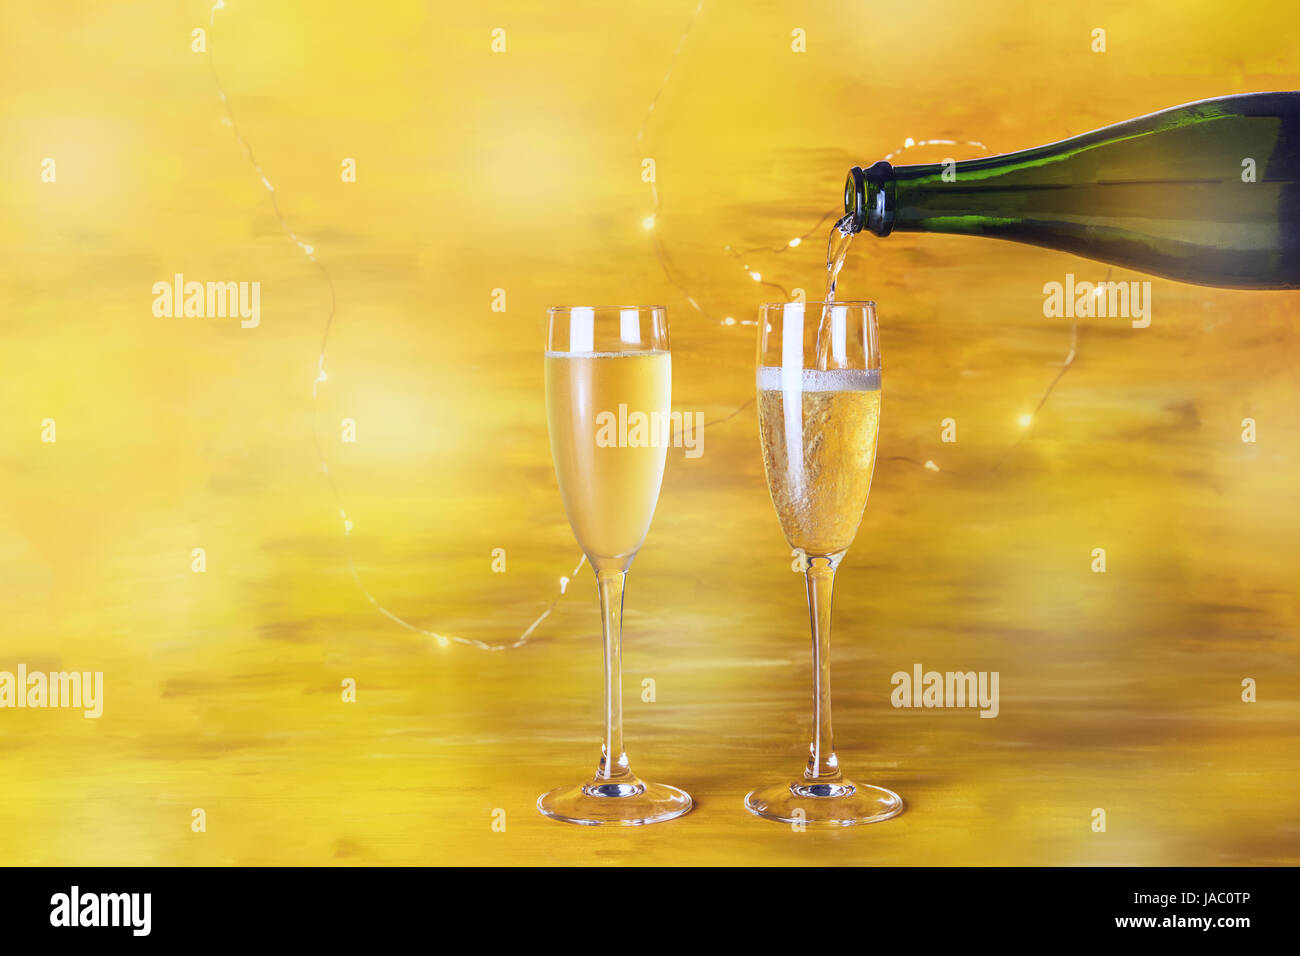 Champagne being poured into glasses on a blurred golden background with shining lights, with a place for text Stock Photo